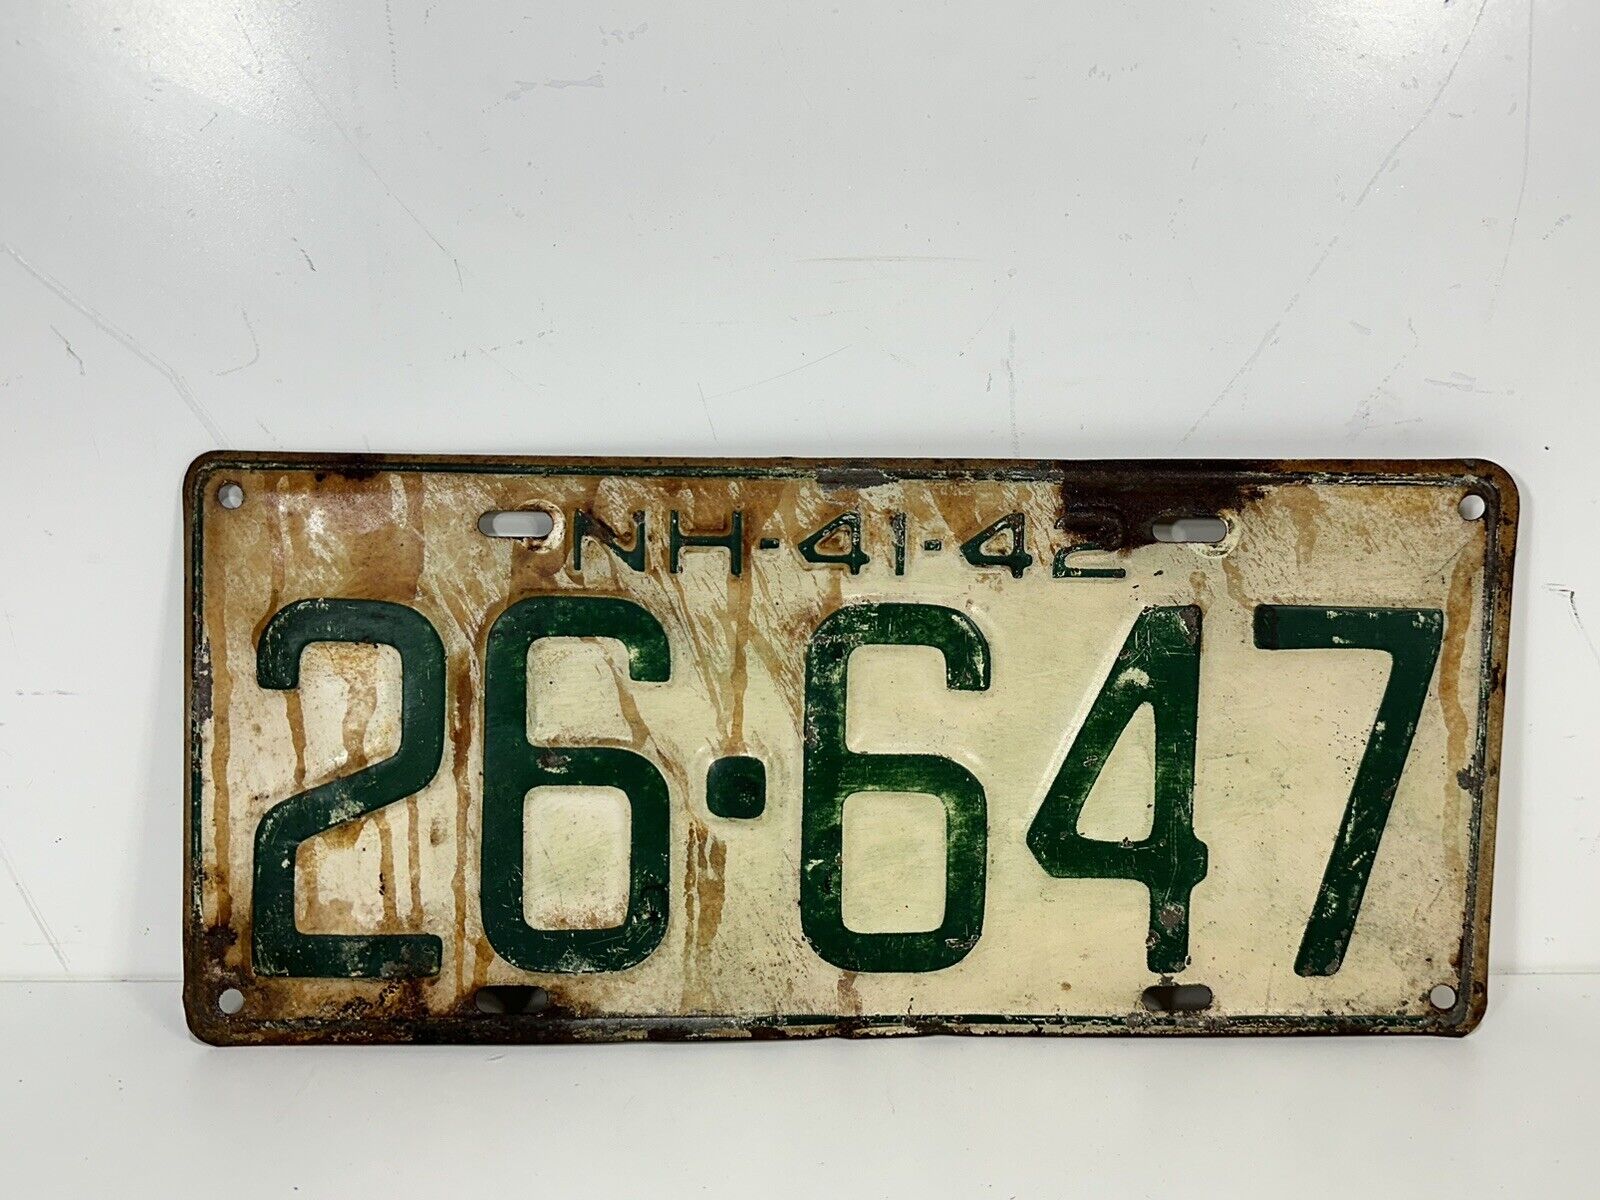 Vintage 1941-42 New Hampshire License Plate ~ 